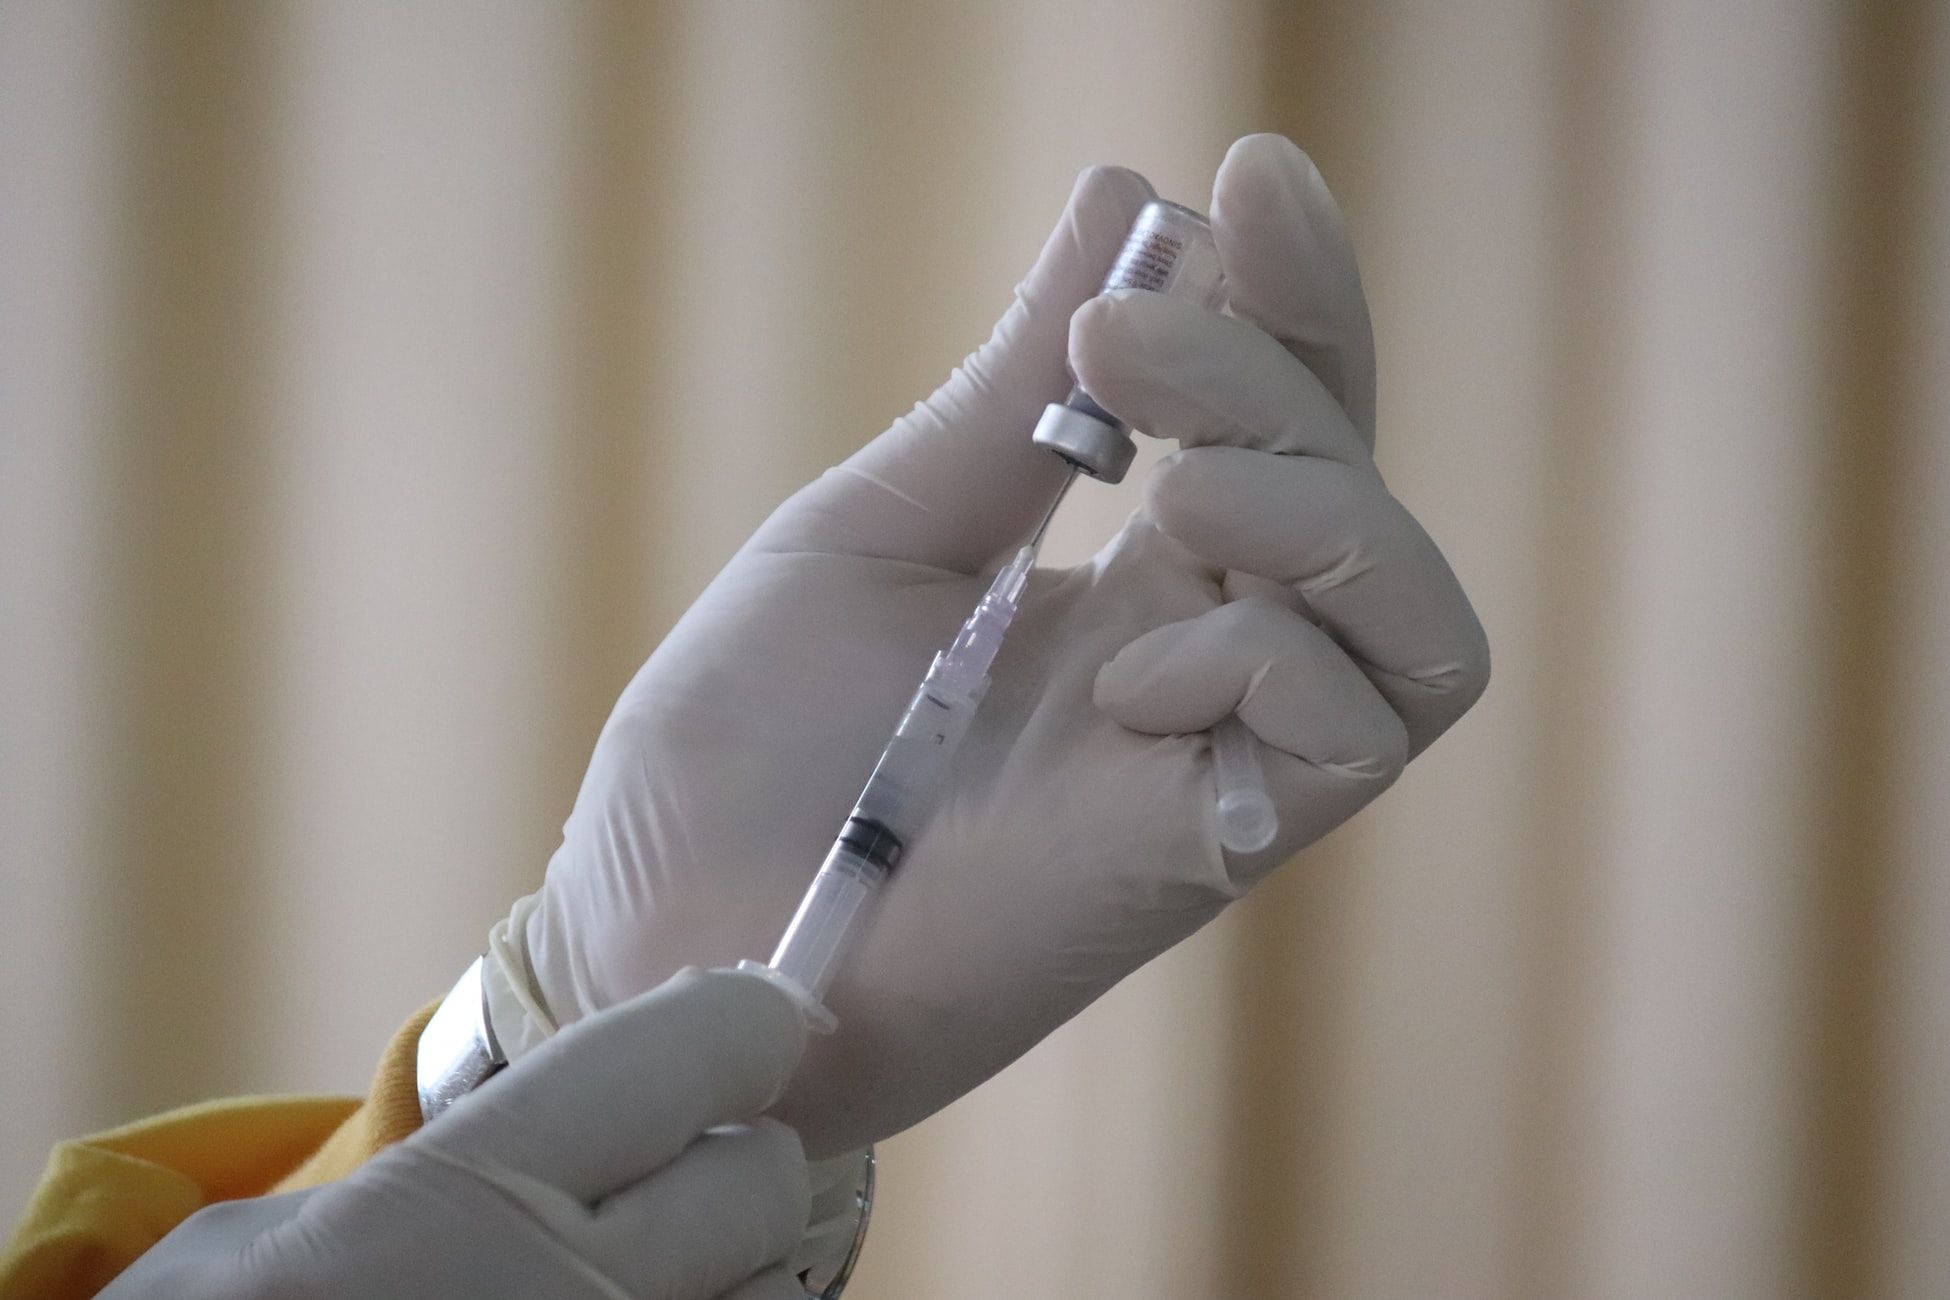 Japan’s Moderna COVID-19 vaccine contamination: What we know